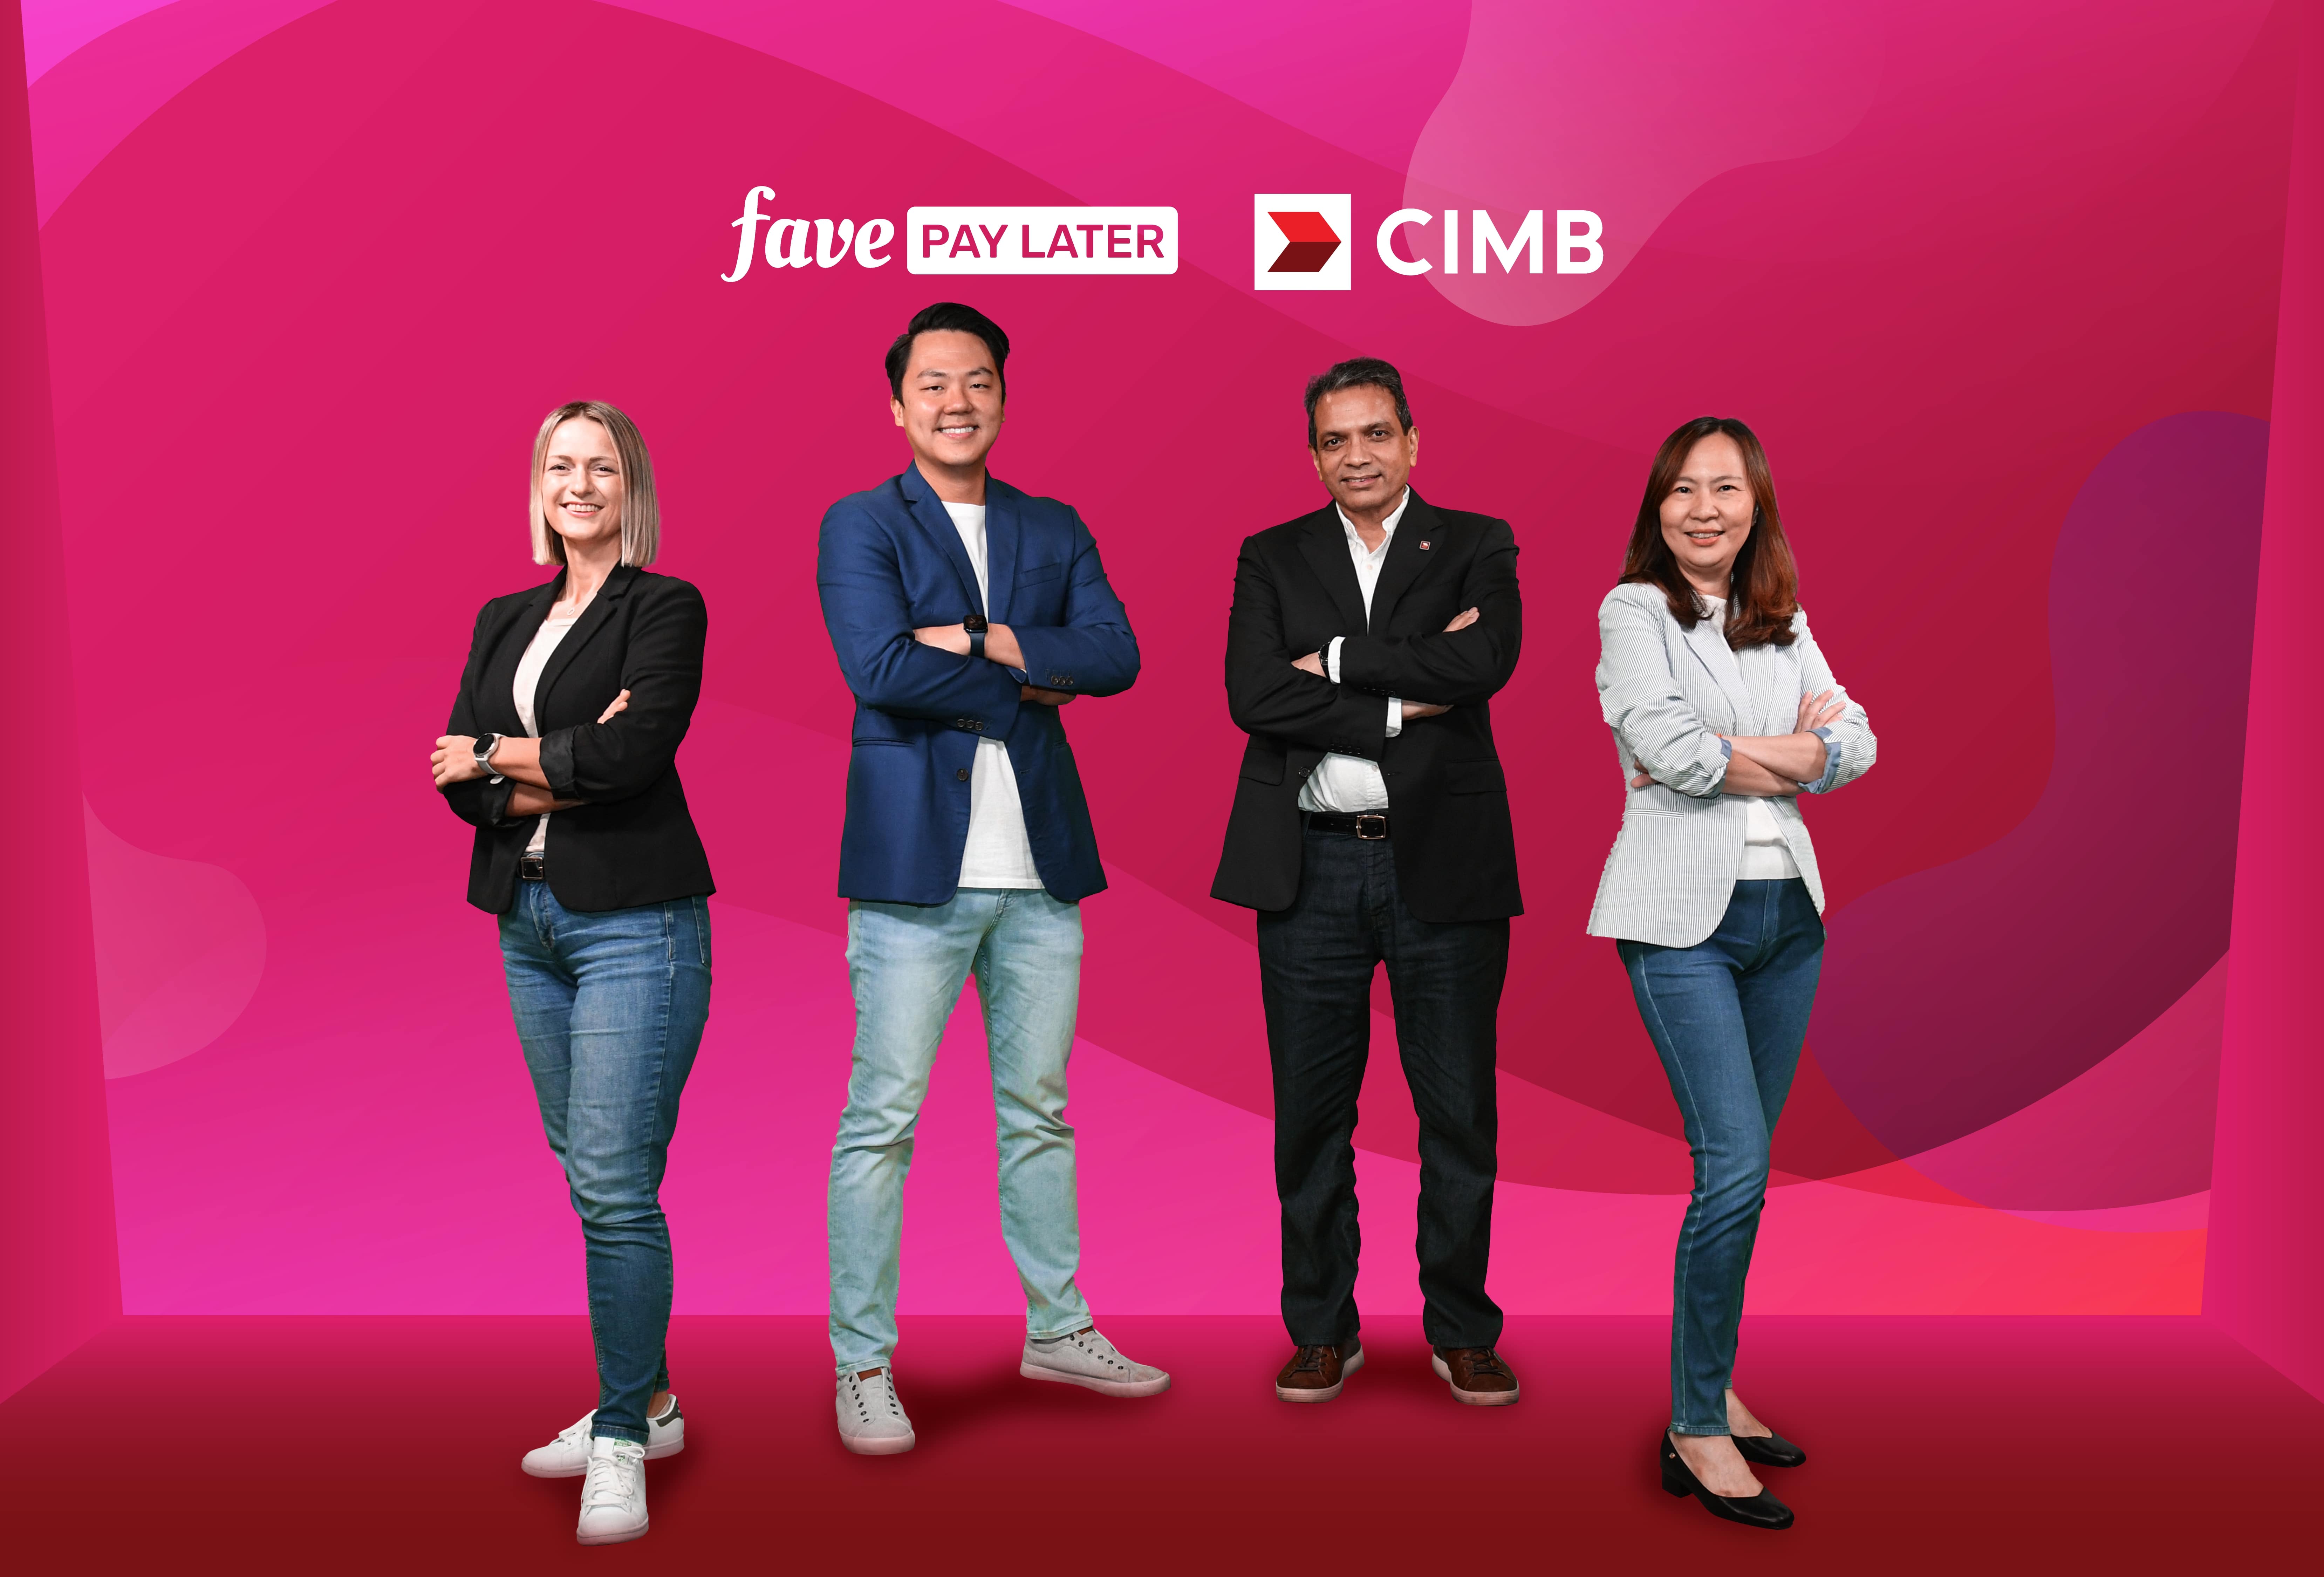 CIMB partners with Fave to offer FavePay Later, a mobile first buy now, pay later service, to all CIMB debit and credit card holders in Malaysia. (L-R) Audra Pakalnyte, head, FavePay Later; Joel Neoh, CEO, Fave with Samir Gupta, CEO, group consumer banking of CIMB Group and Tan Bee Bee, regional head, credit cards & personal financing (MY) of CIMB Group.